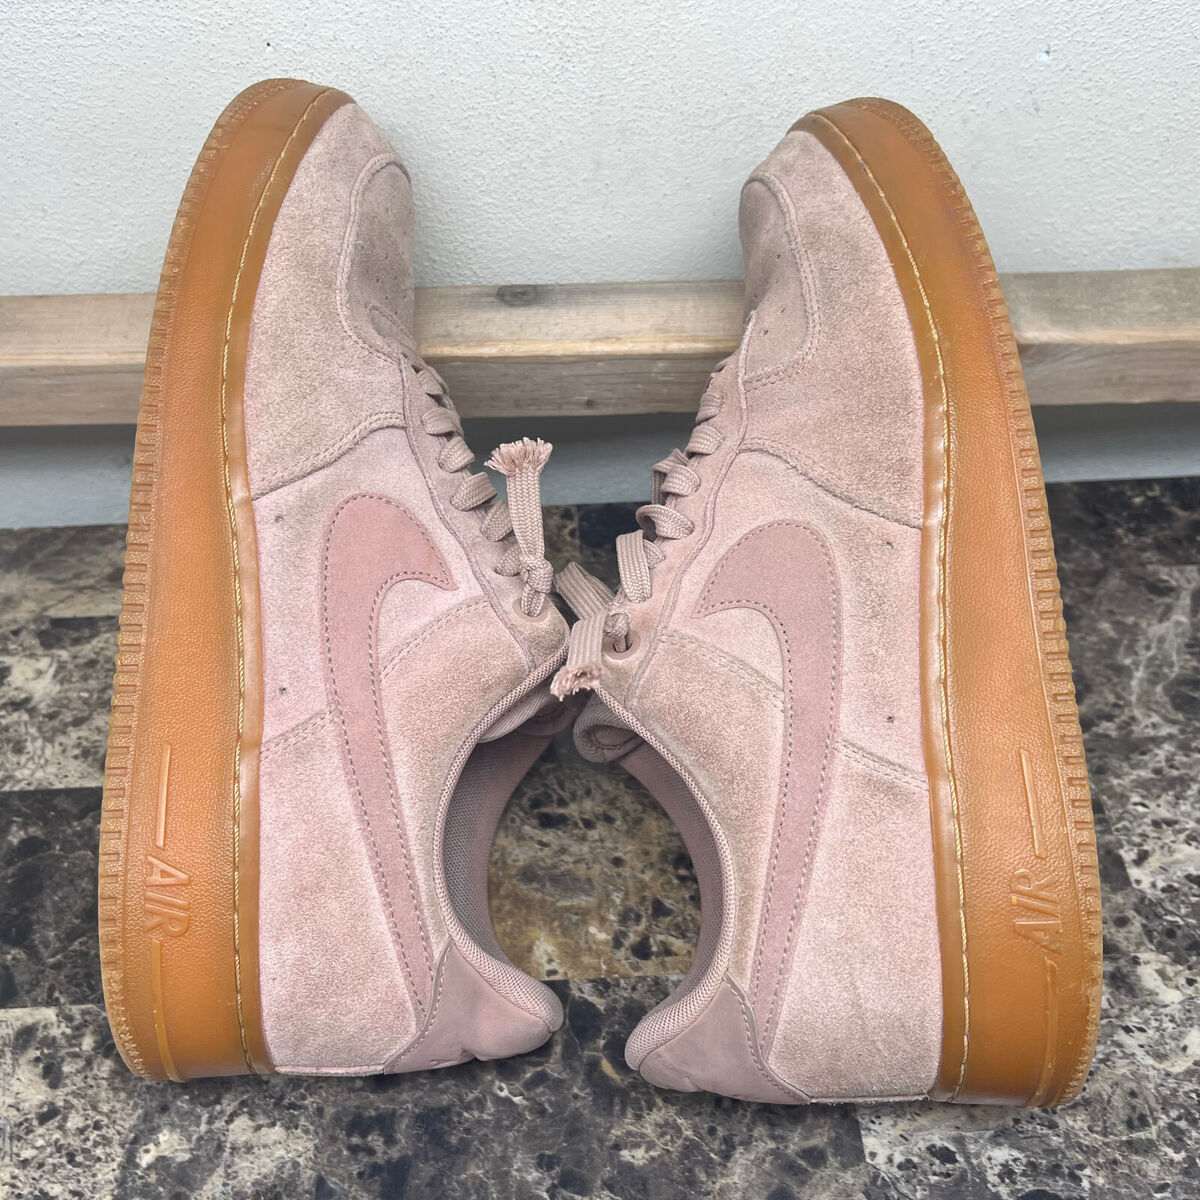 NIKE AIR FORCE 1 '07 LV8 SUEDE PARTICLE PINK [AA1117 600] US MEN SZ 10